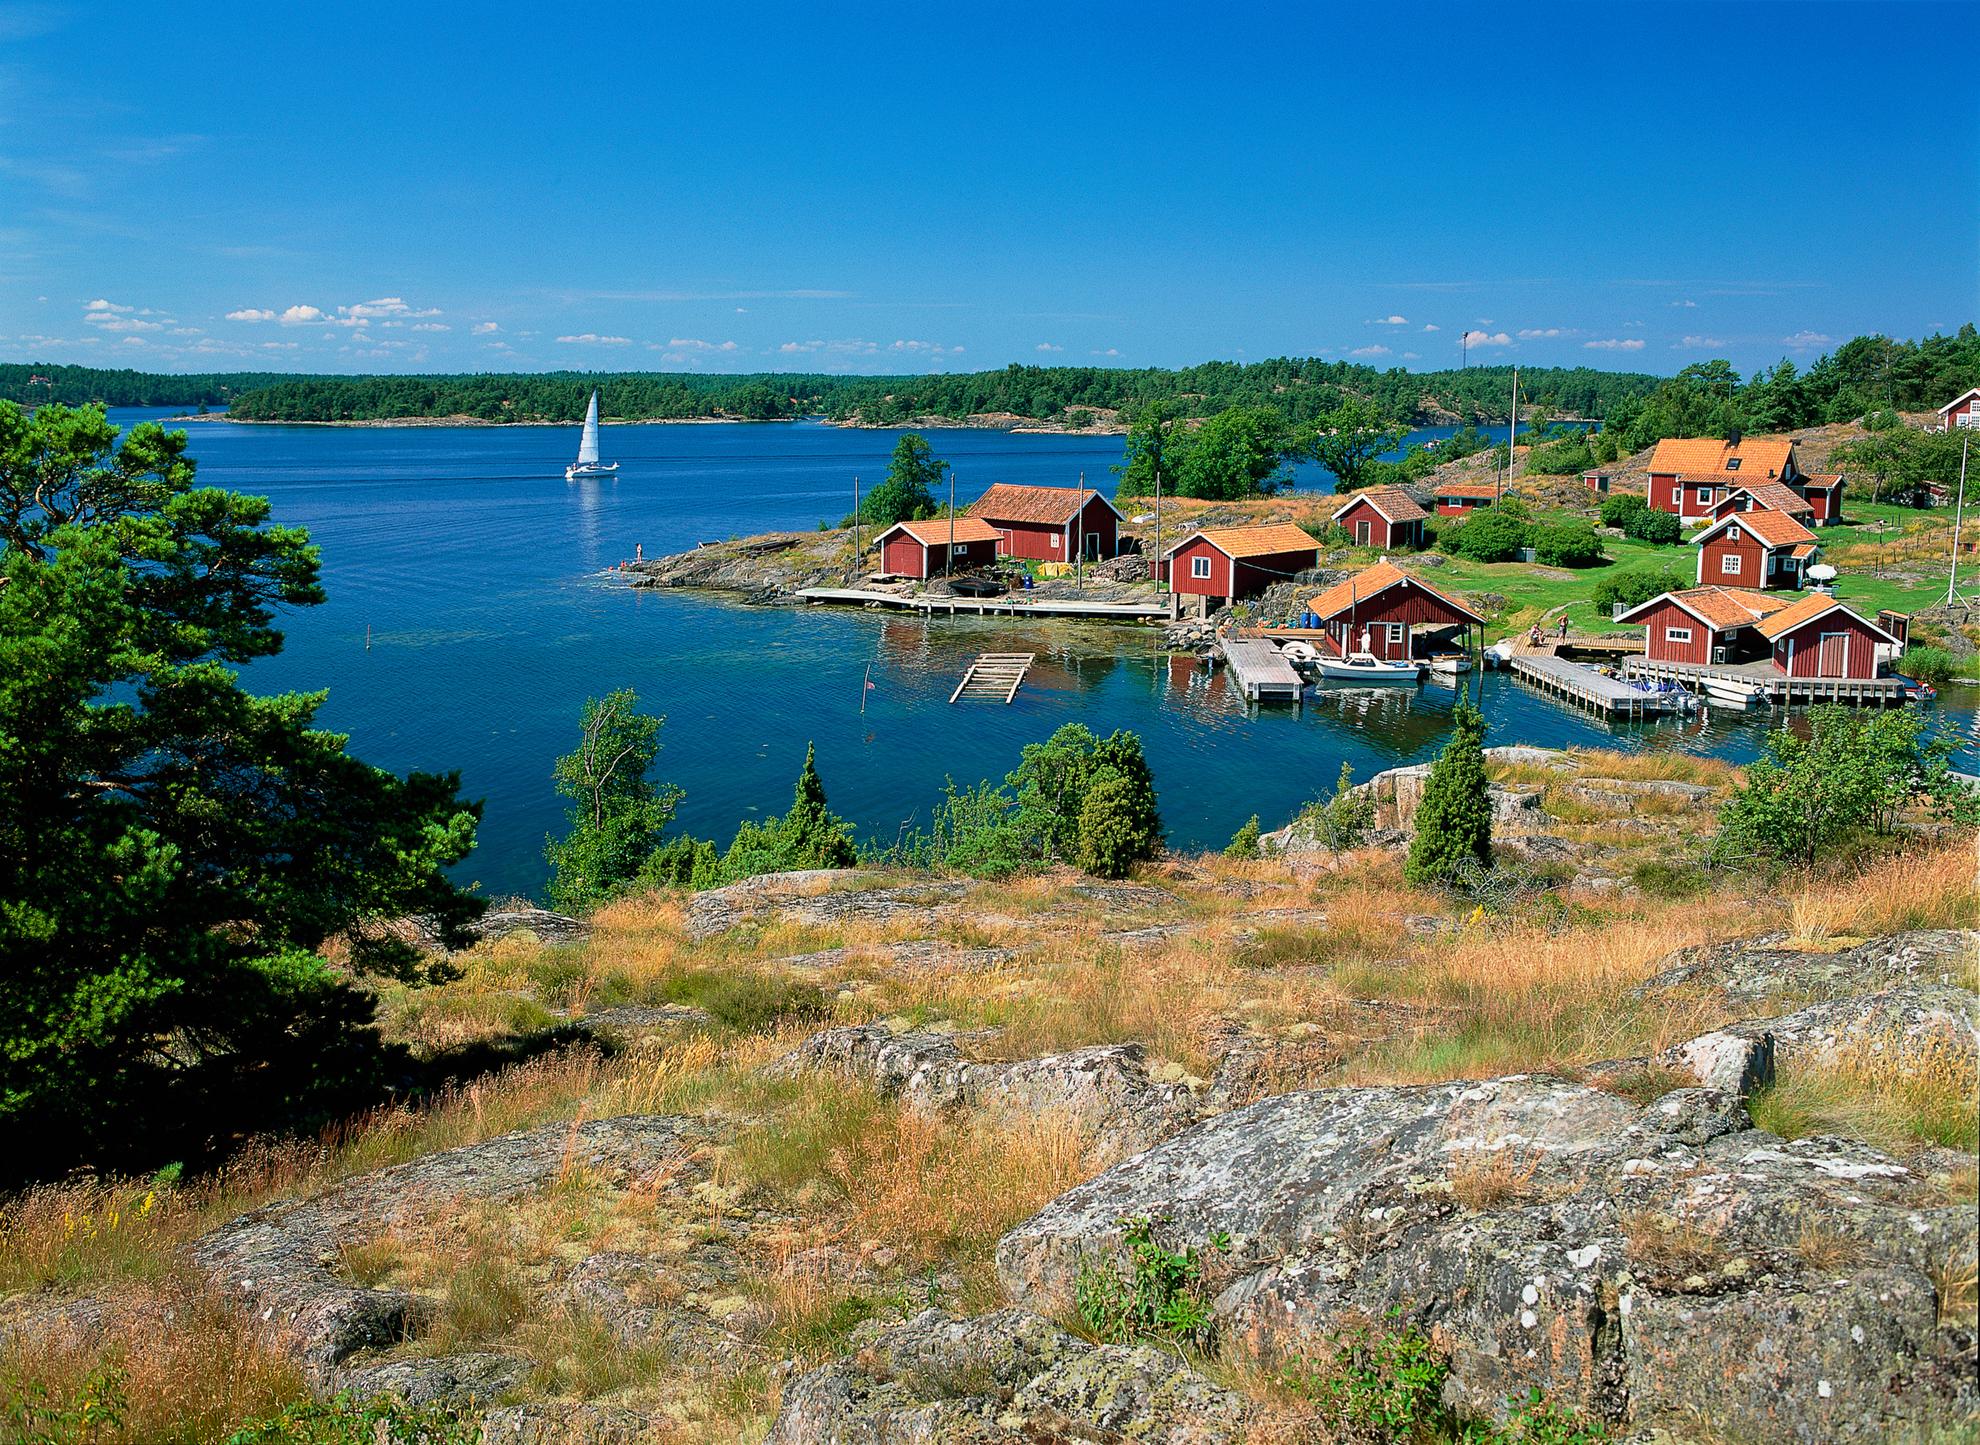 Red cottages on an island in the archipelago on a sunny day. A sailboat sails by the islands.